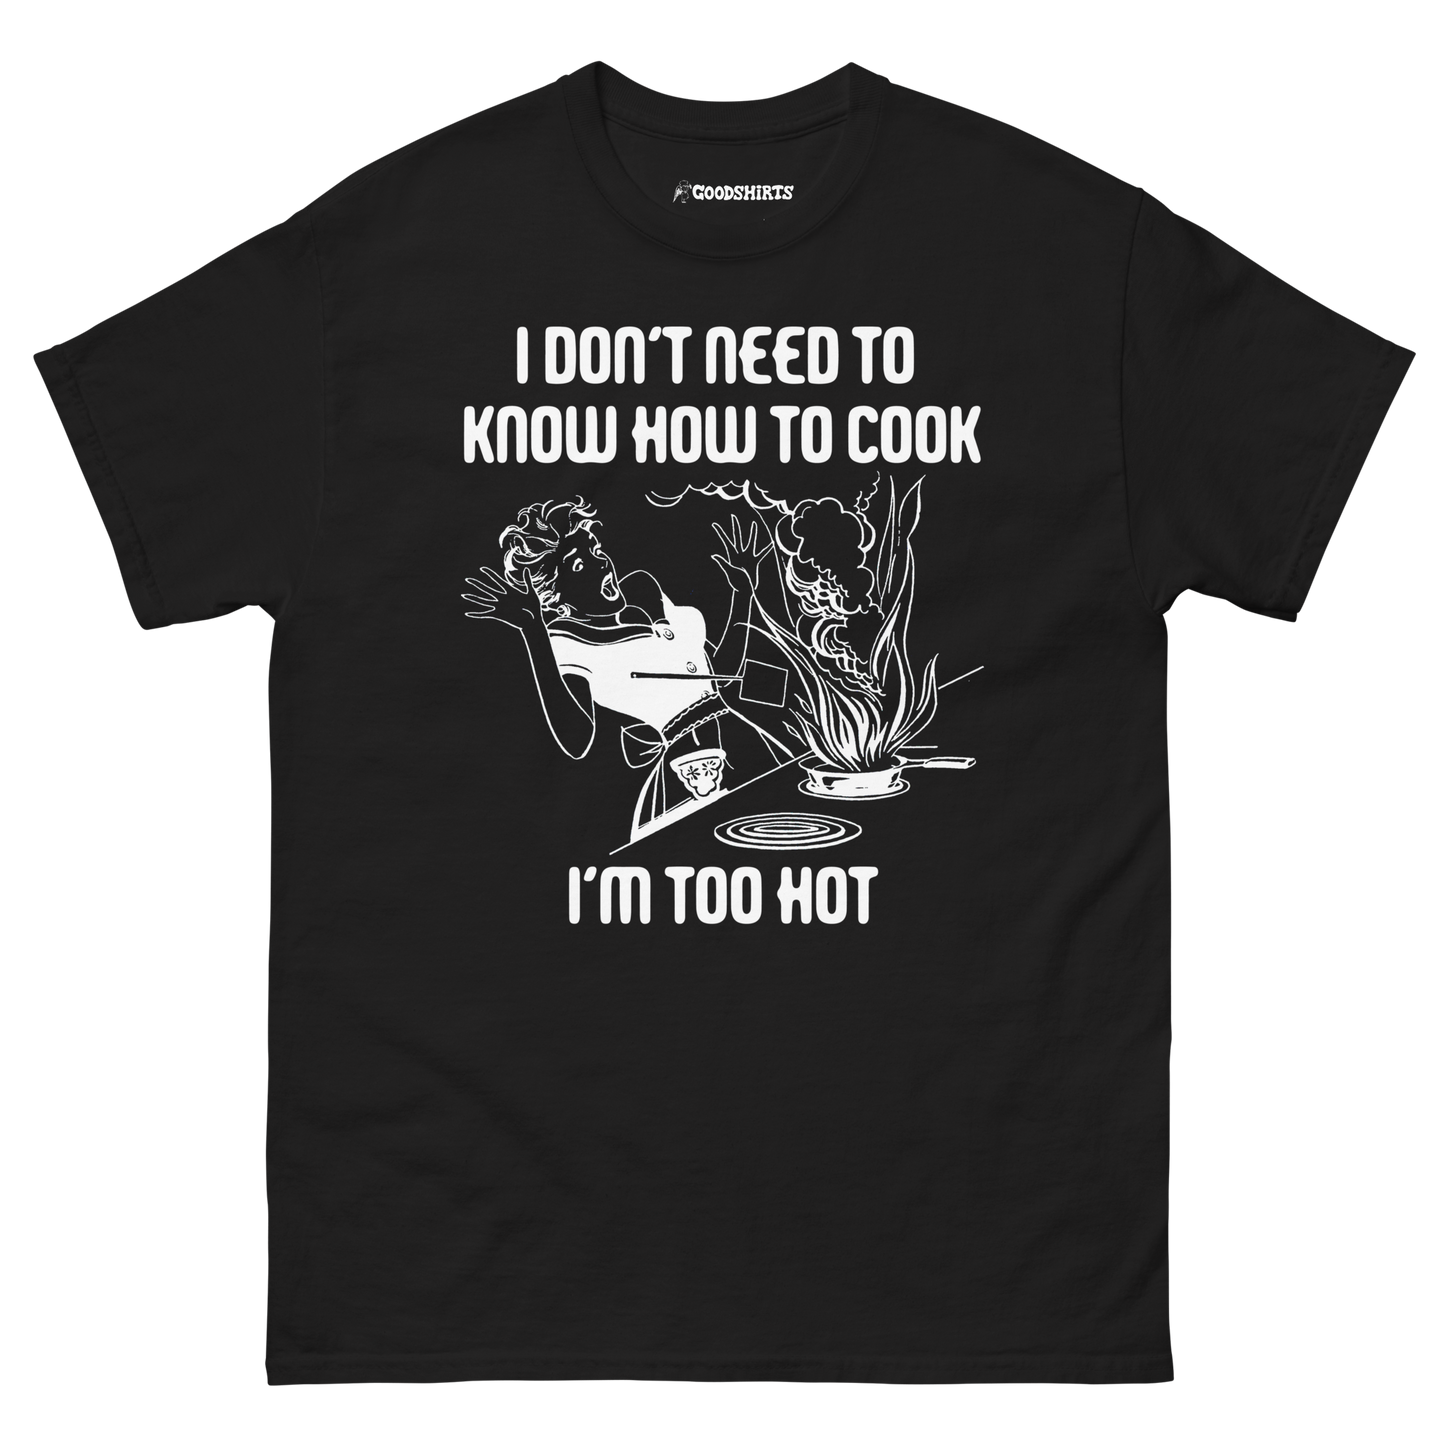 I Don't Need To Know How To Cook.